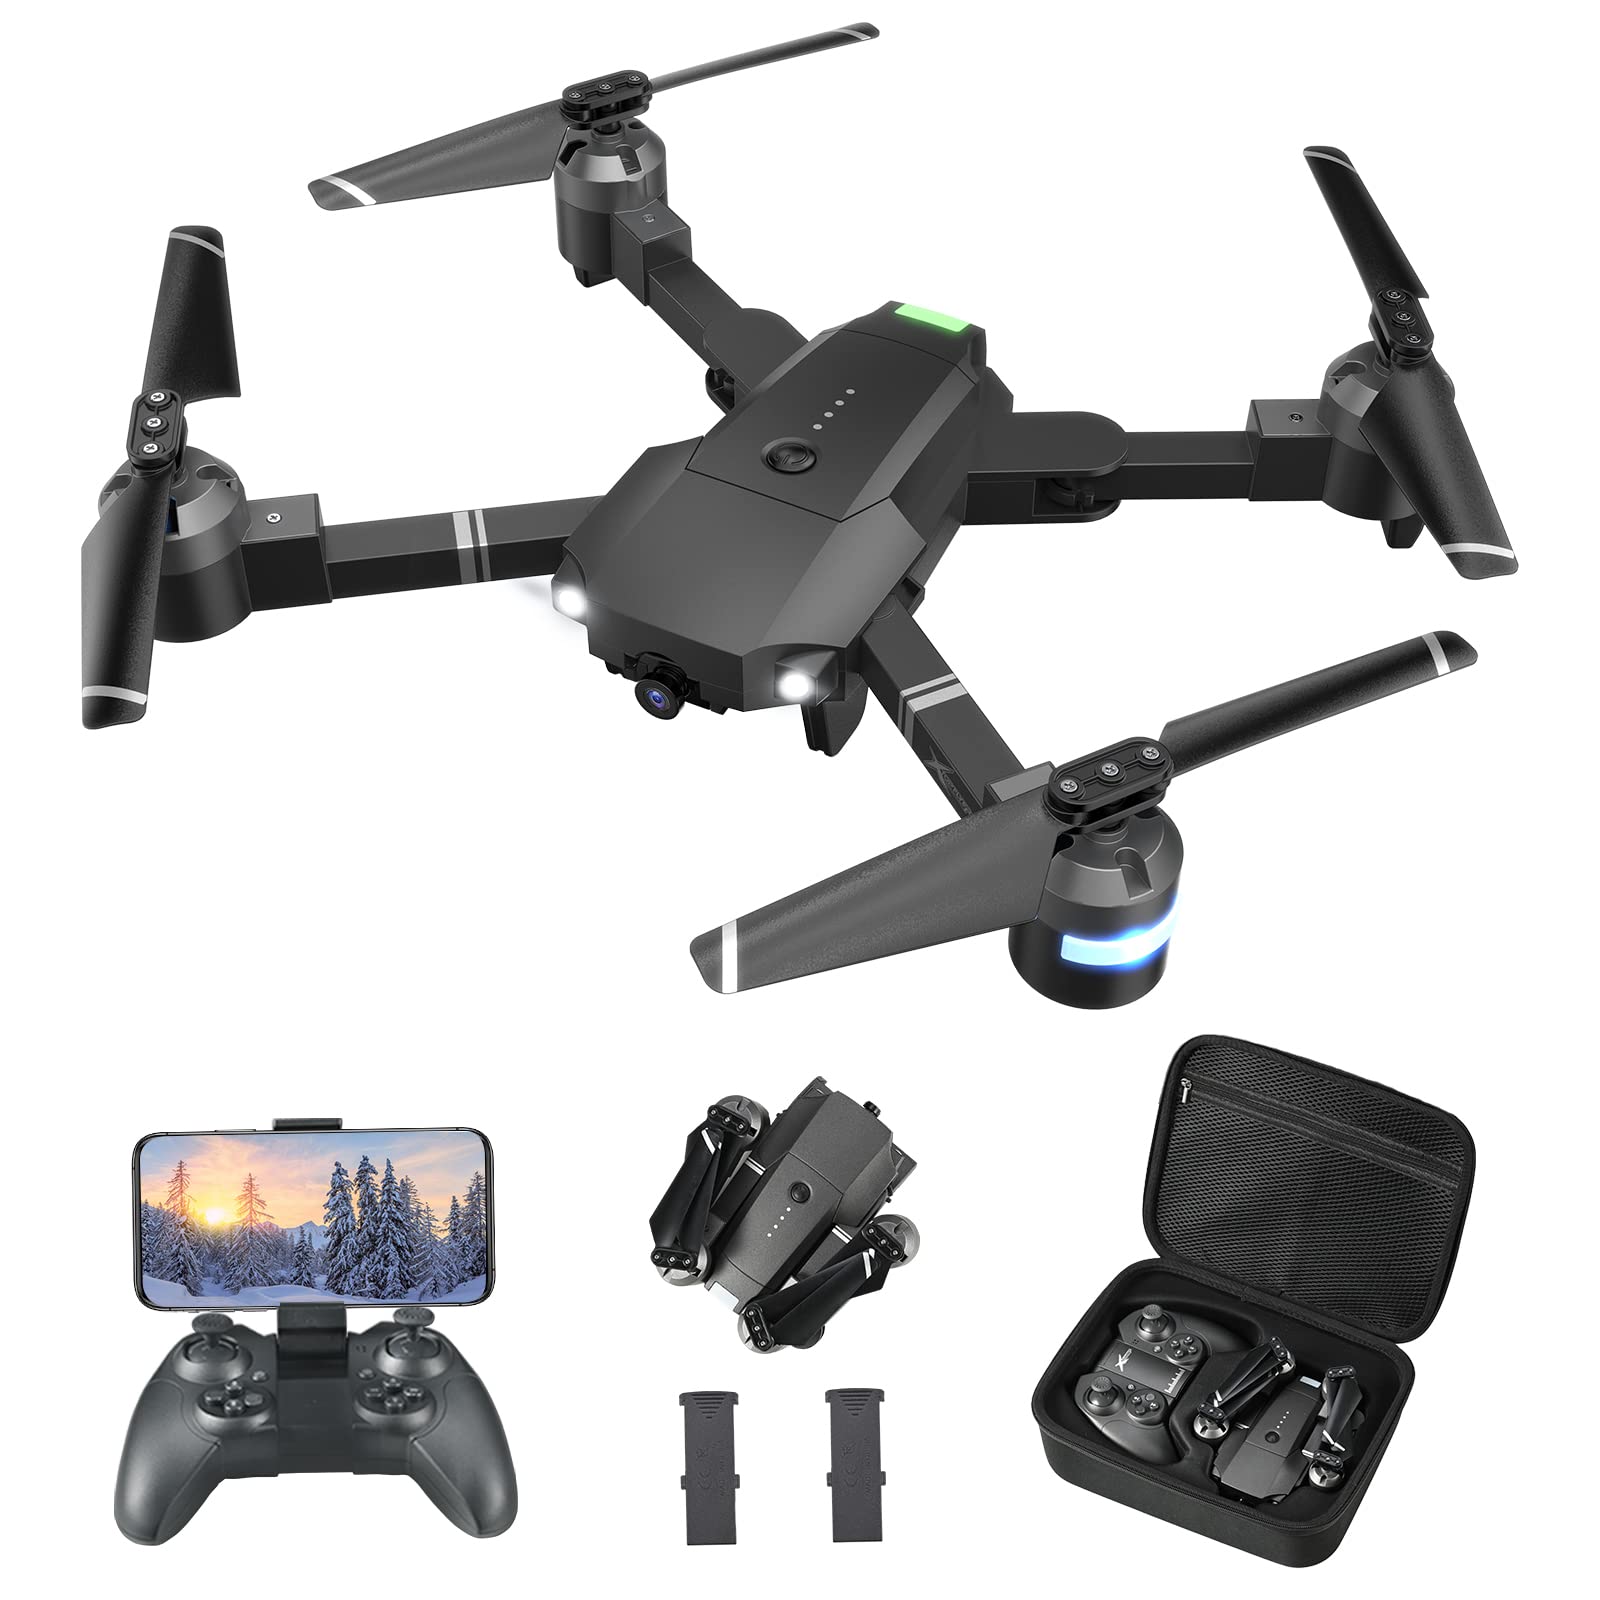 ATTOP Drones with Camera for Adults - 1080P FPV Drones with Carrying Case, Long Distance Quadcopter Equipped w/2 batteries, One key Return/Emergency Stop,  Drones for Adults/Beginners, Christmas Gift